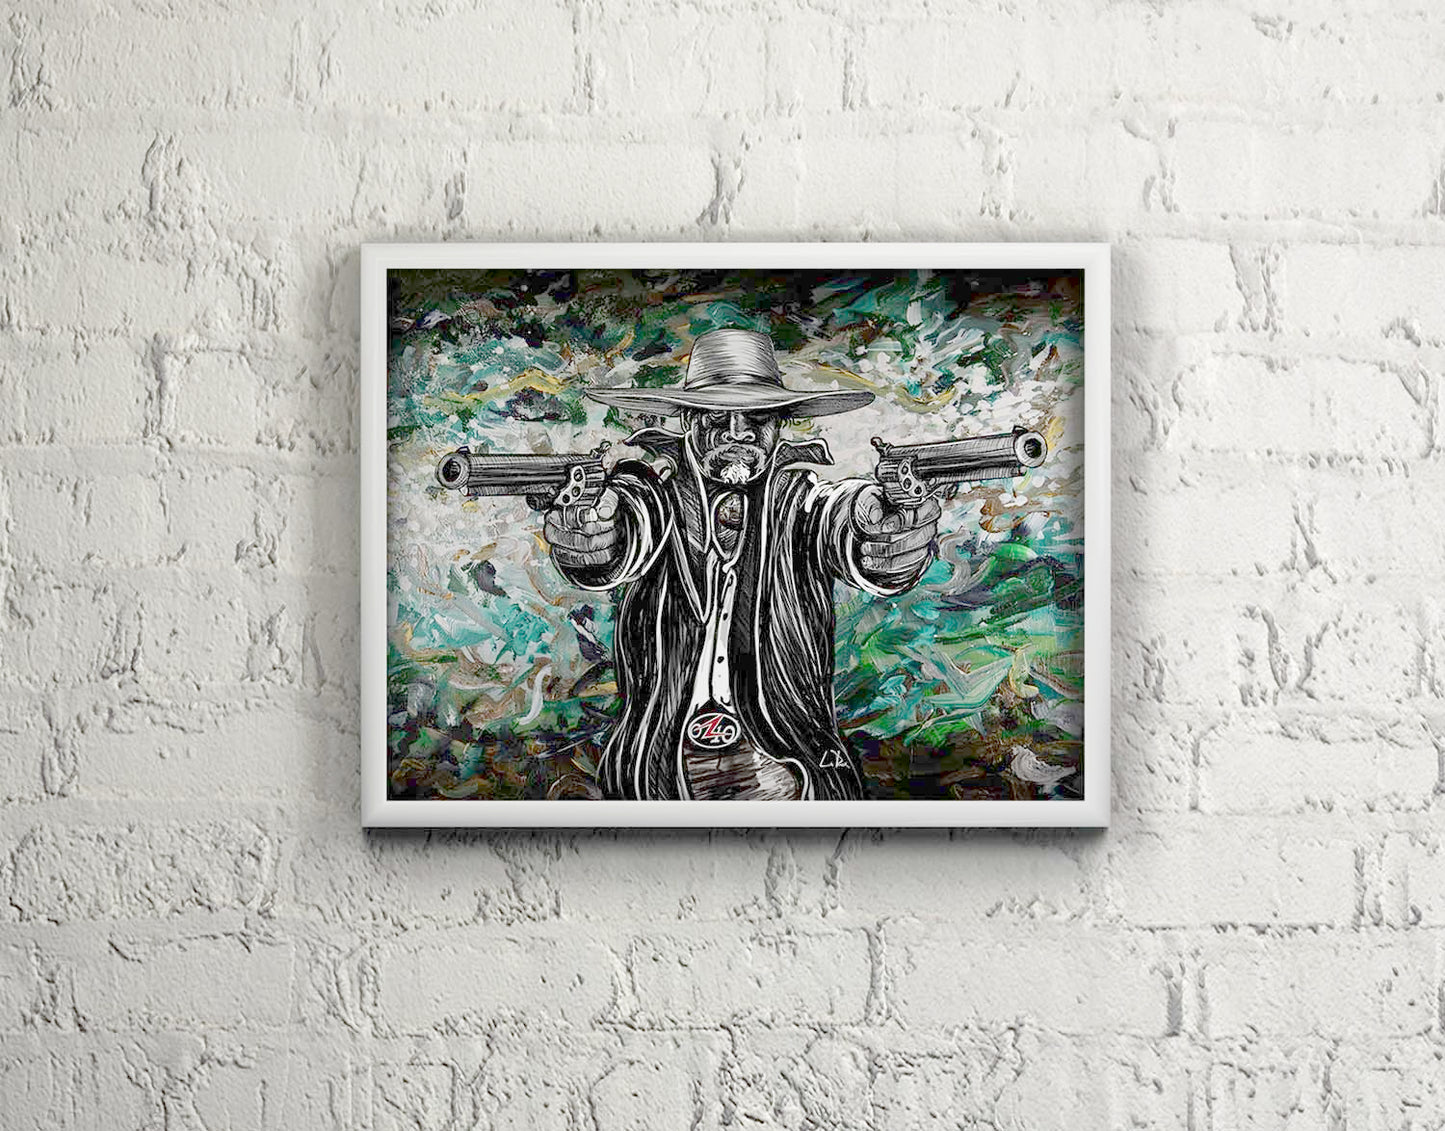 Bad Hombre art by Doug LaRue in a white frame on a white brick wall